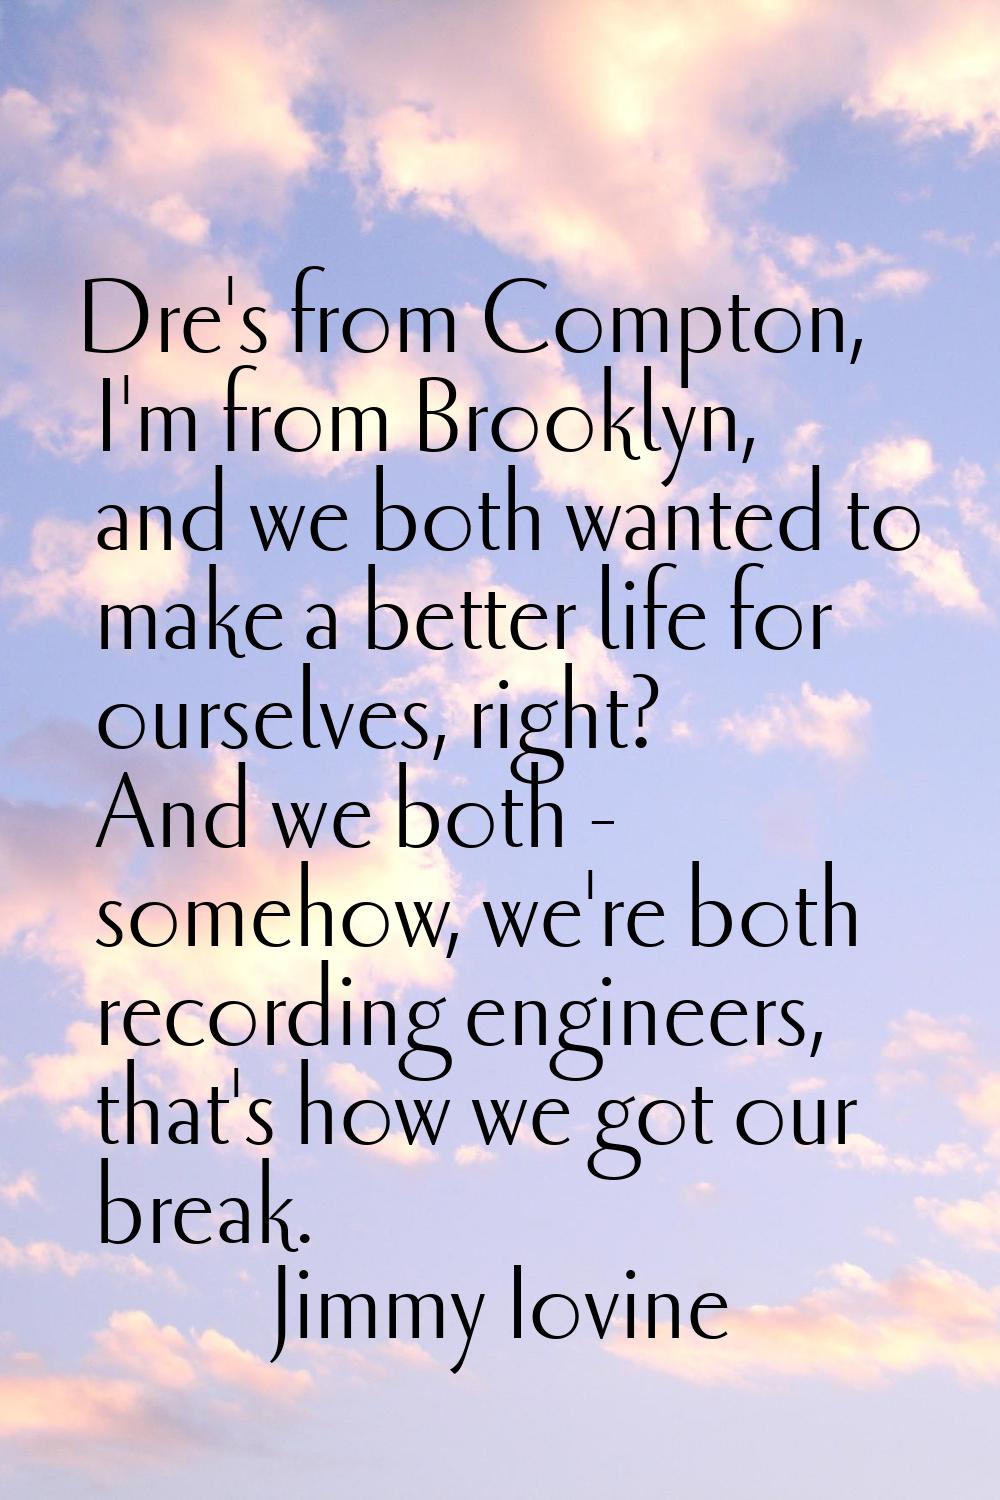 Dre's from Compton, I'm from Brooklyn, and we both wanted to make a better life for ourselves, righ